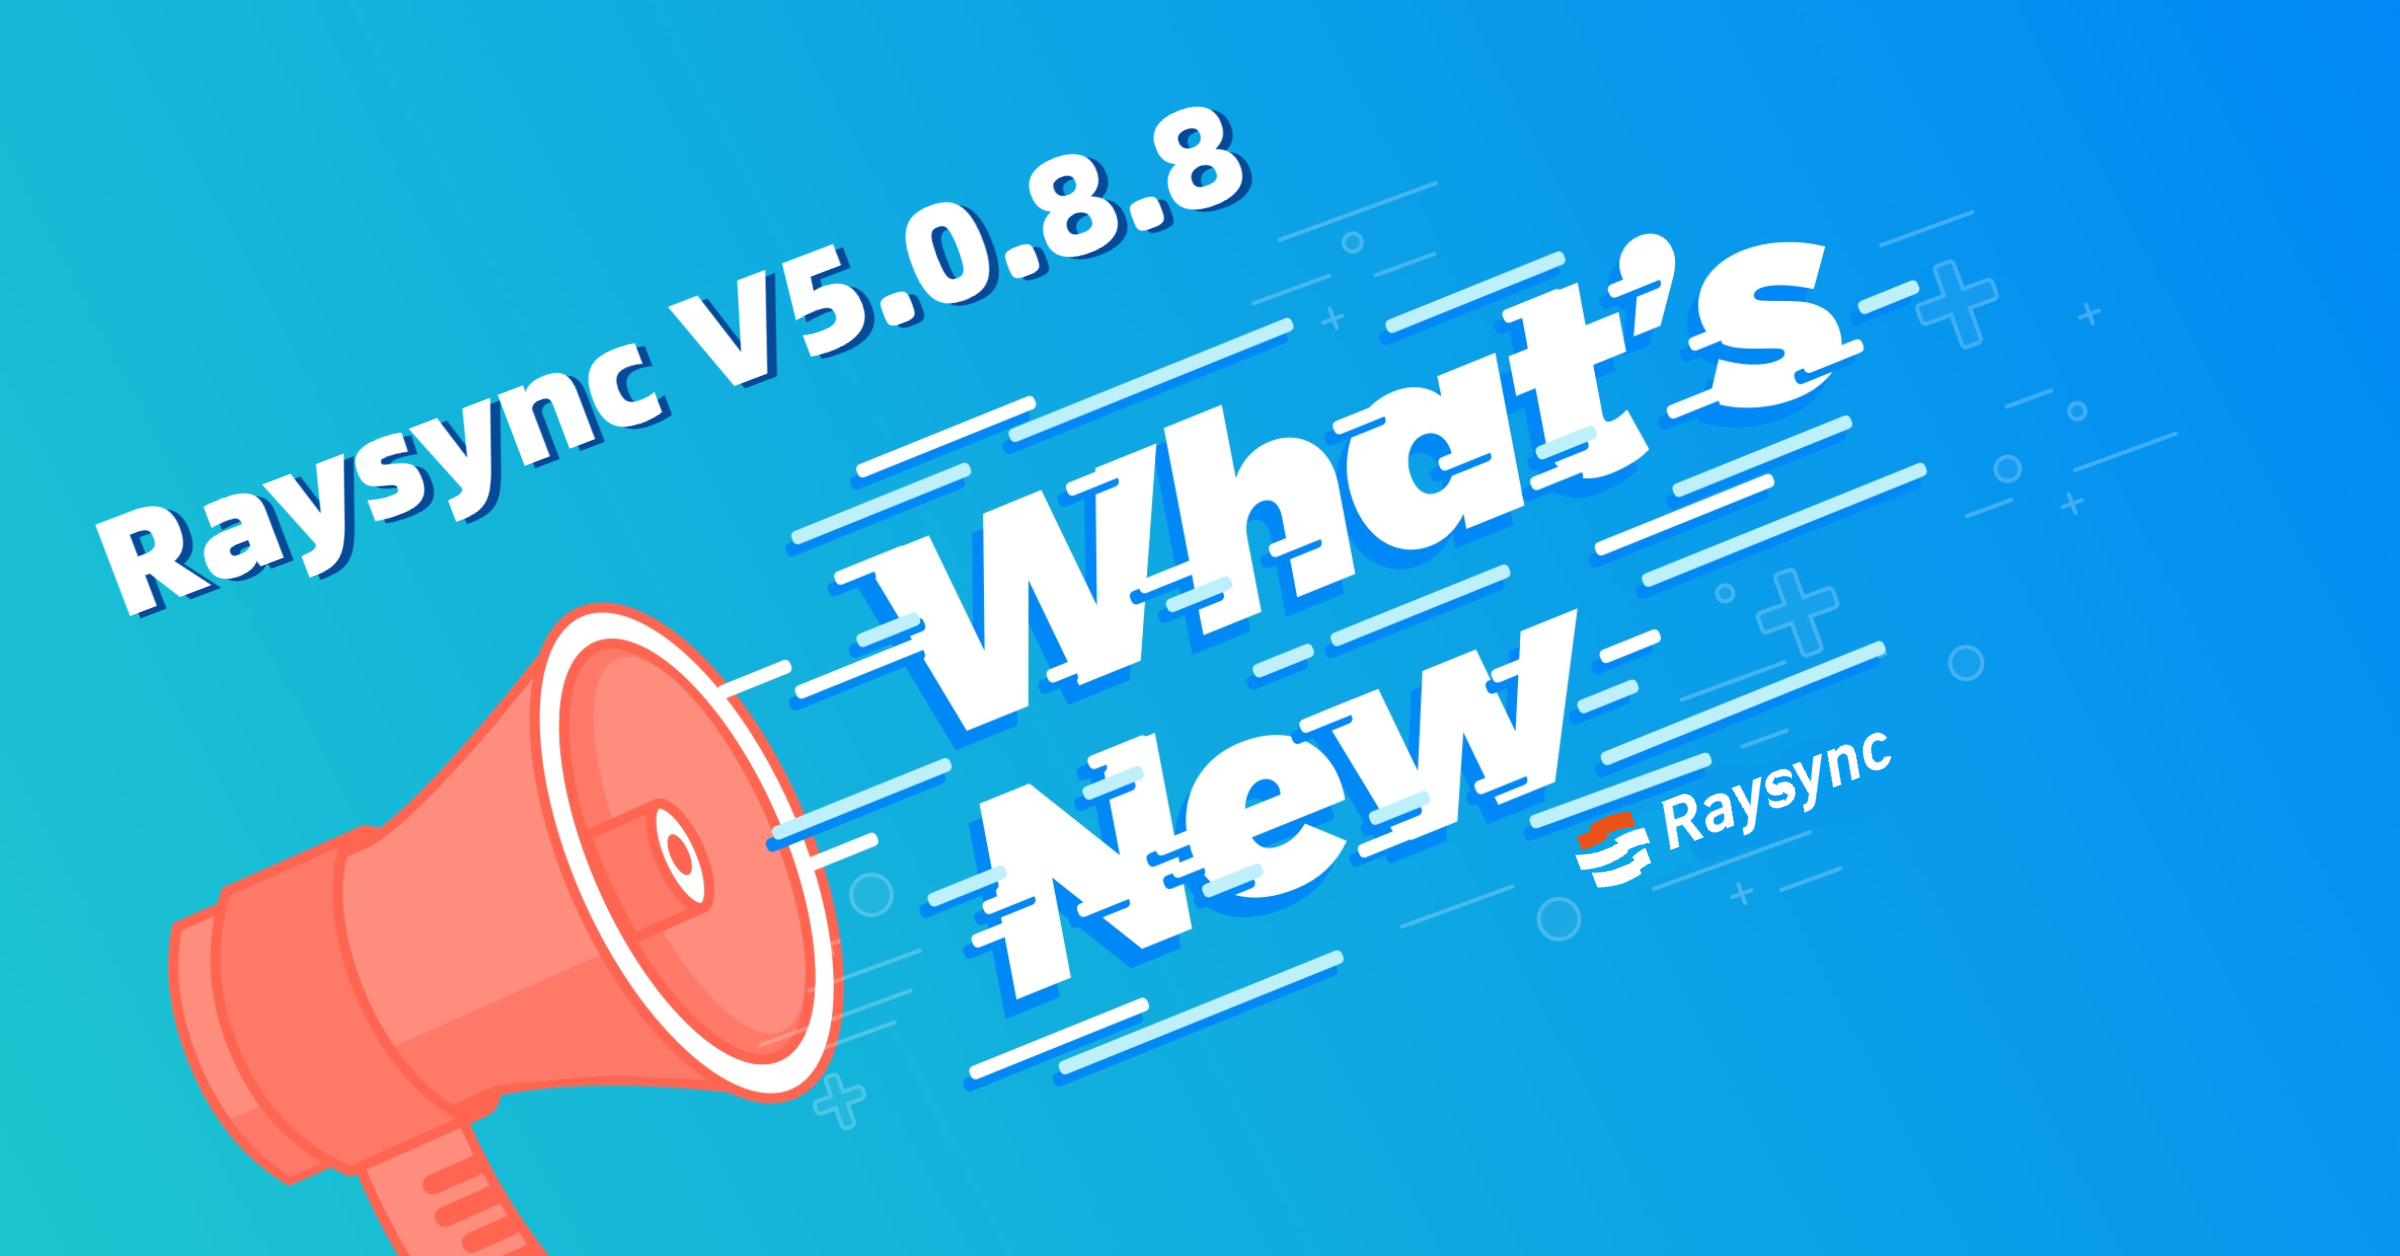 What's New in Raysync V5.0.8.8?